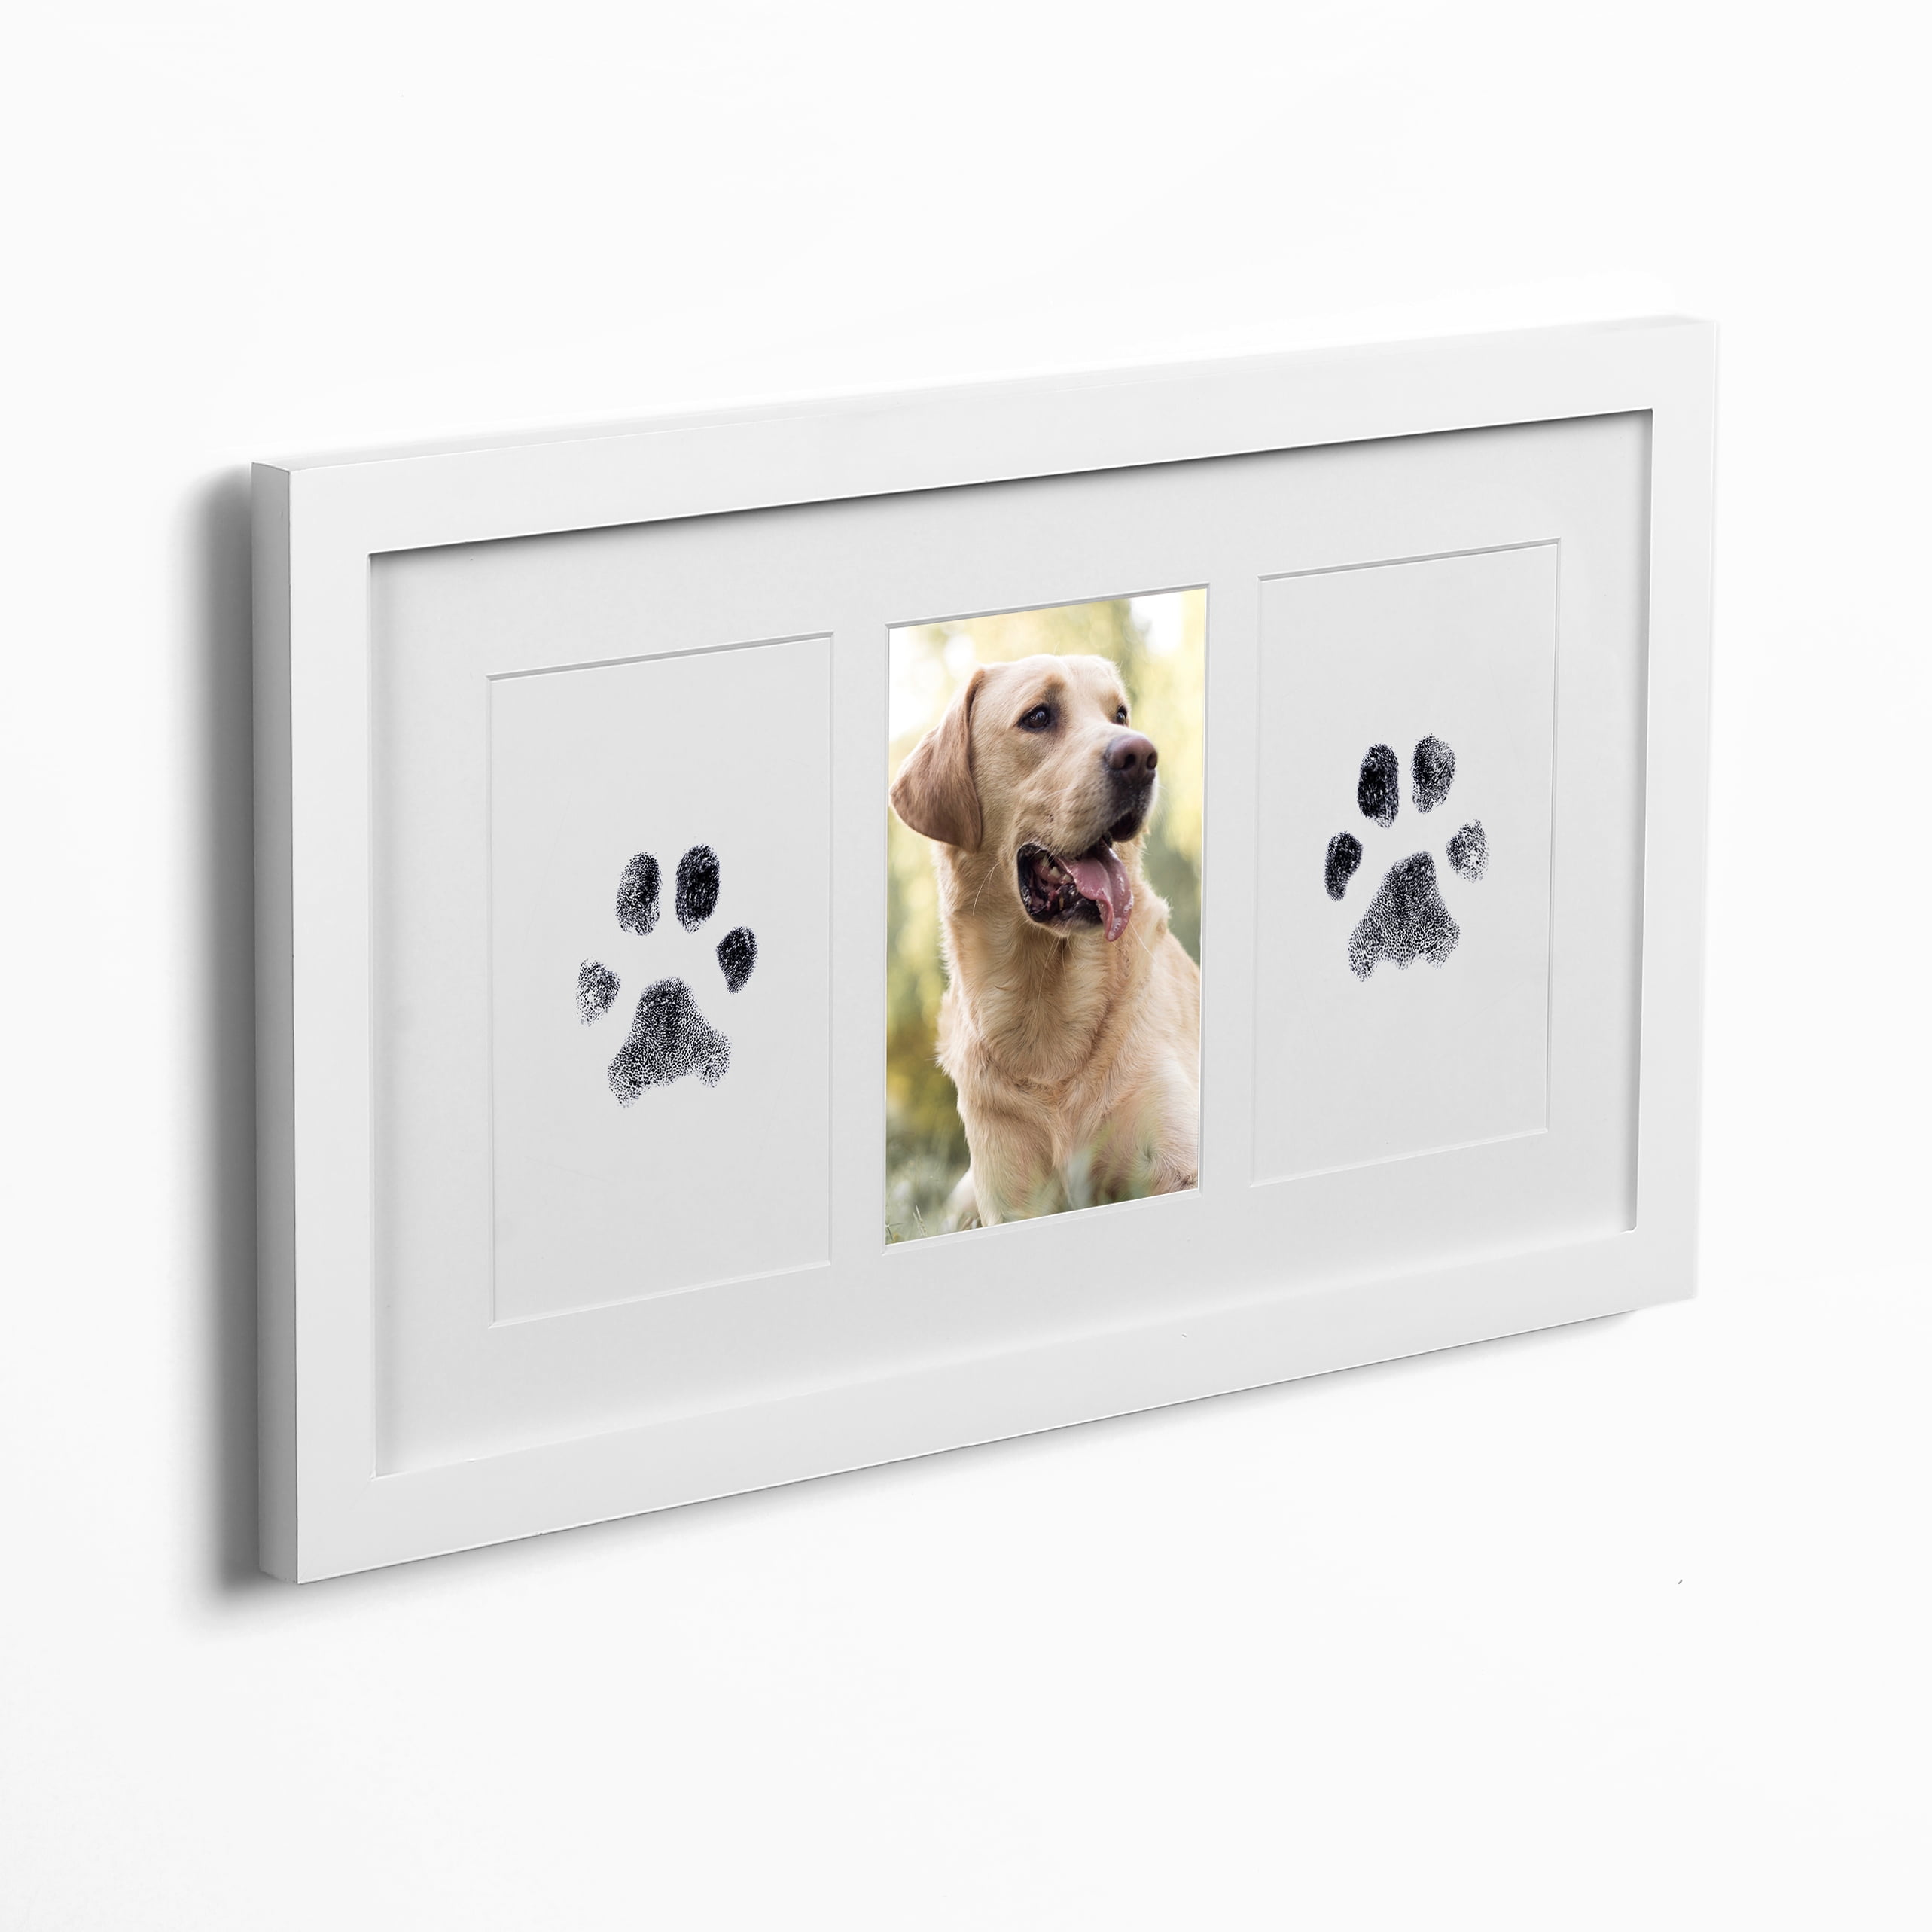 YGORTECH Paw Print Frame Kit- No Mess Ink Pad for Pets-Dog or Cat Pet  Memorial Picture Frame-Premium Wooden Pawprint Photo Frame Makes a  Personalized